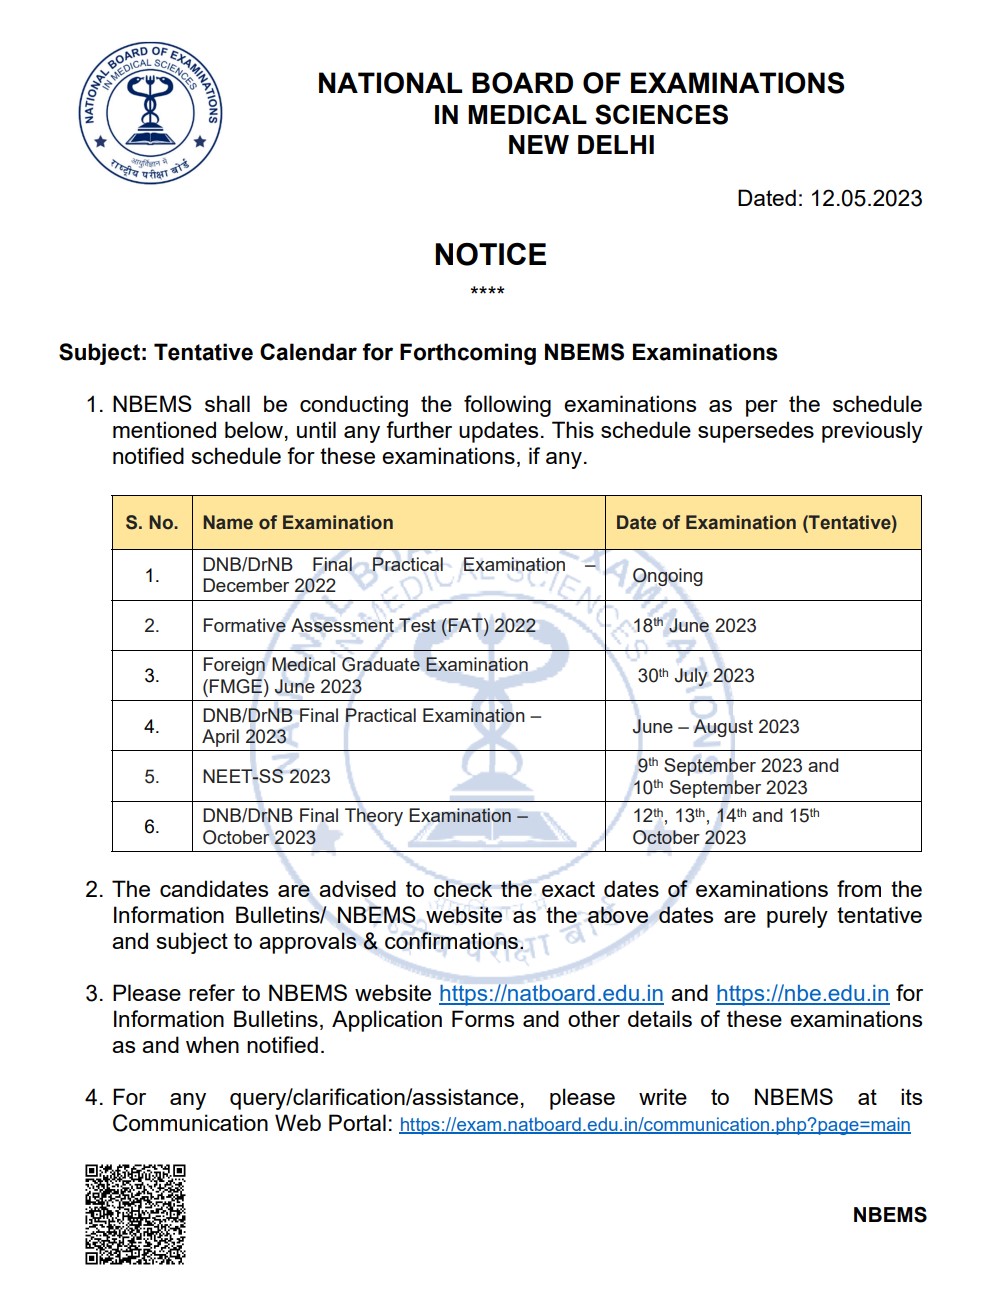 NBE announced that FMGE 2023 will be held on July 30